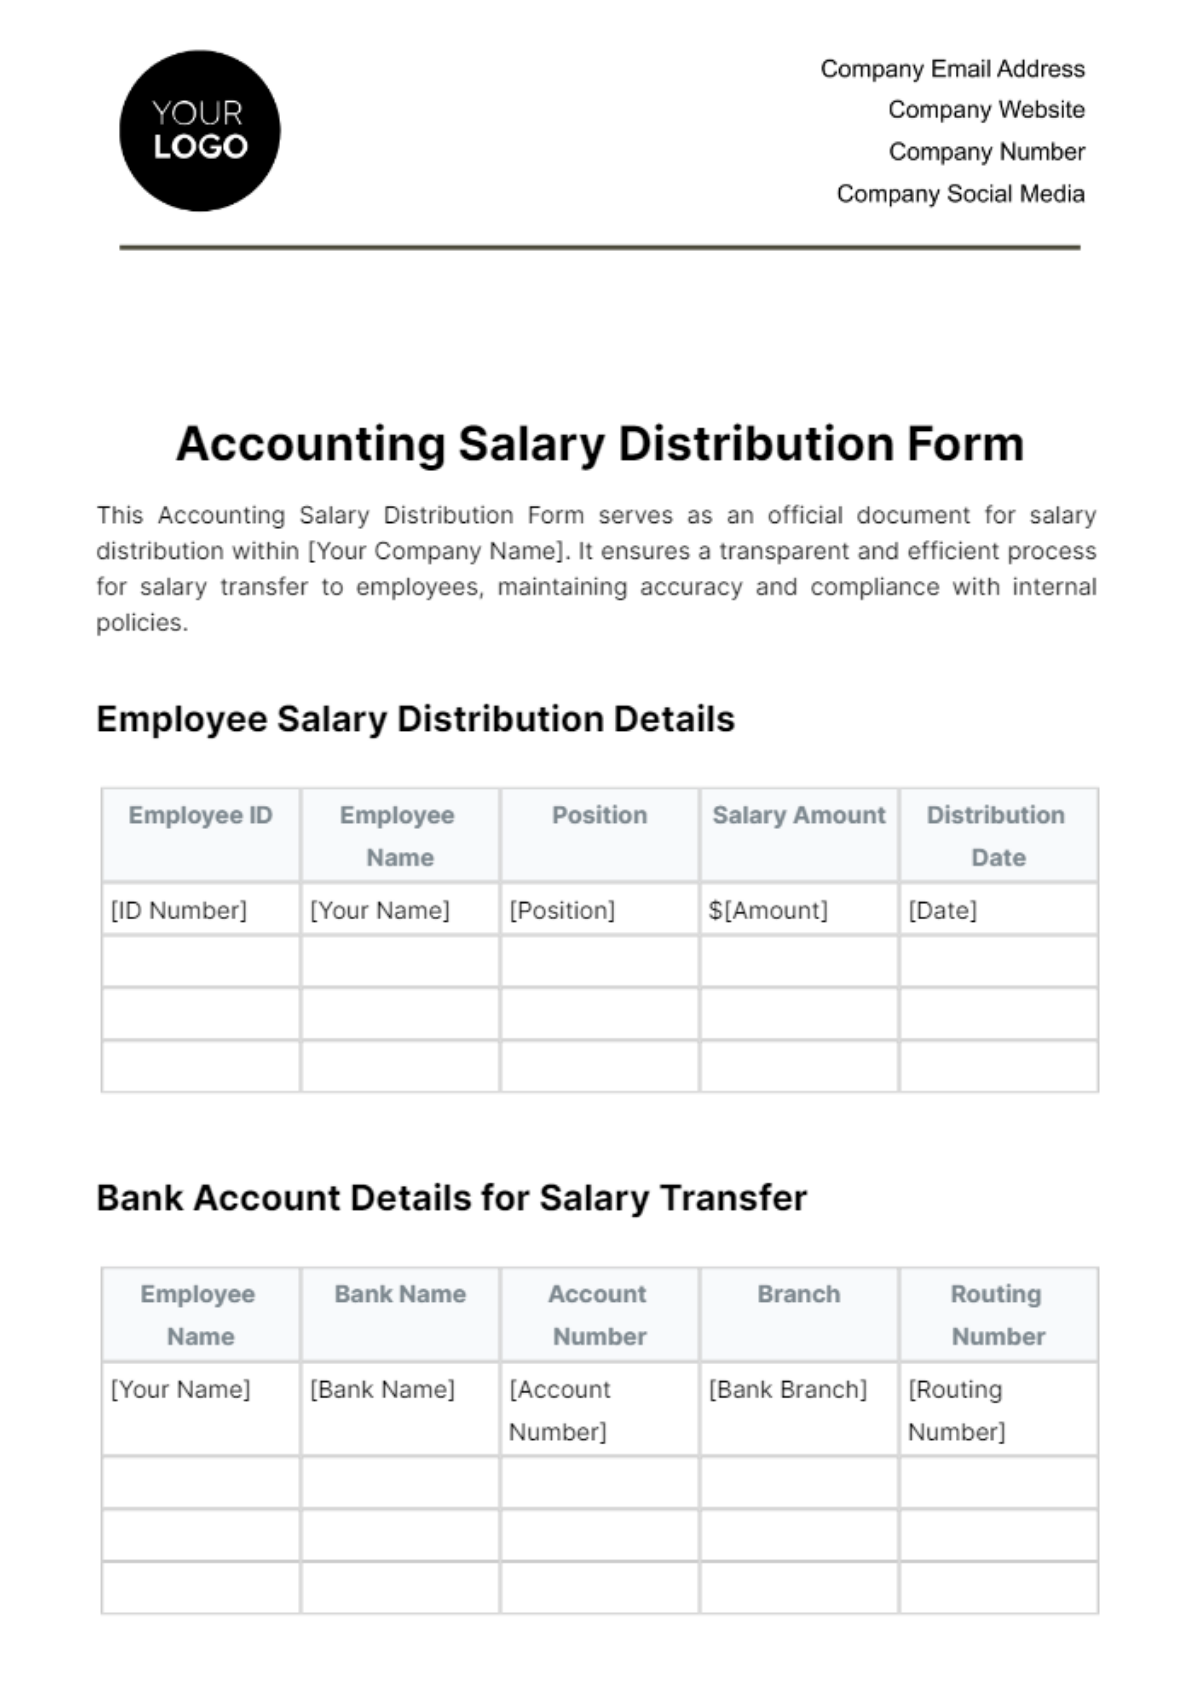 Accounting Salary Distribution Form Template